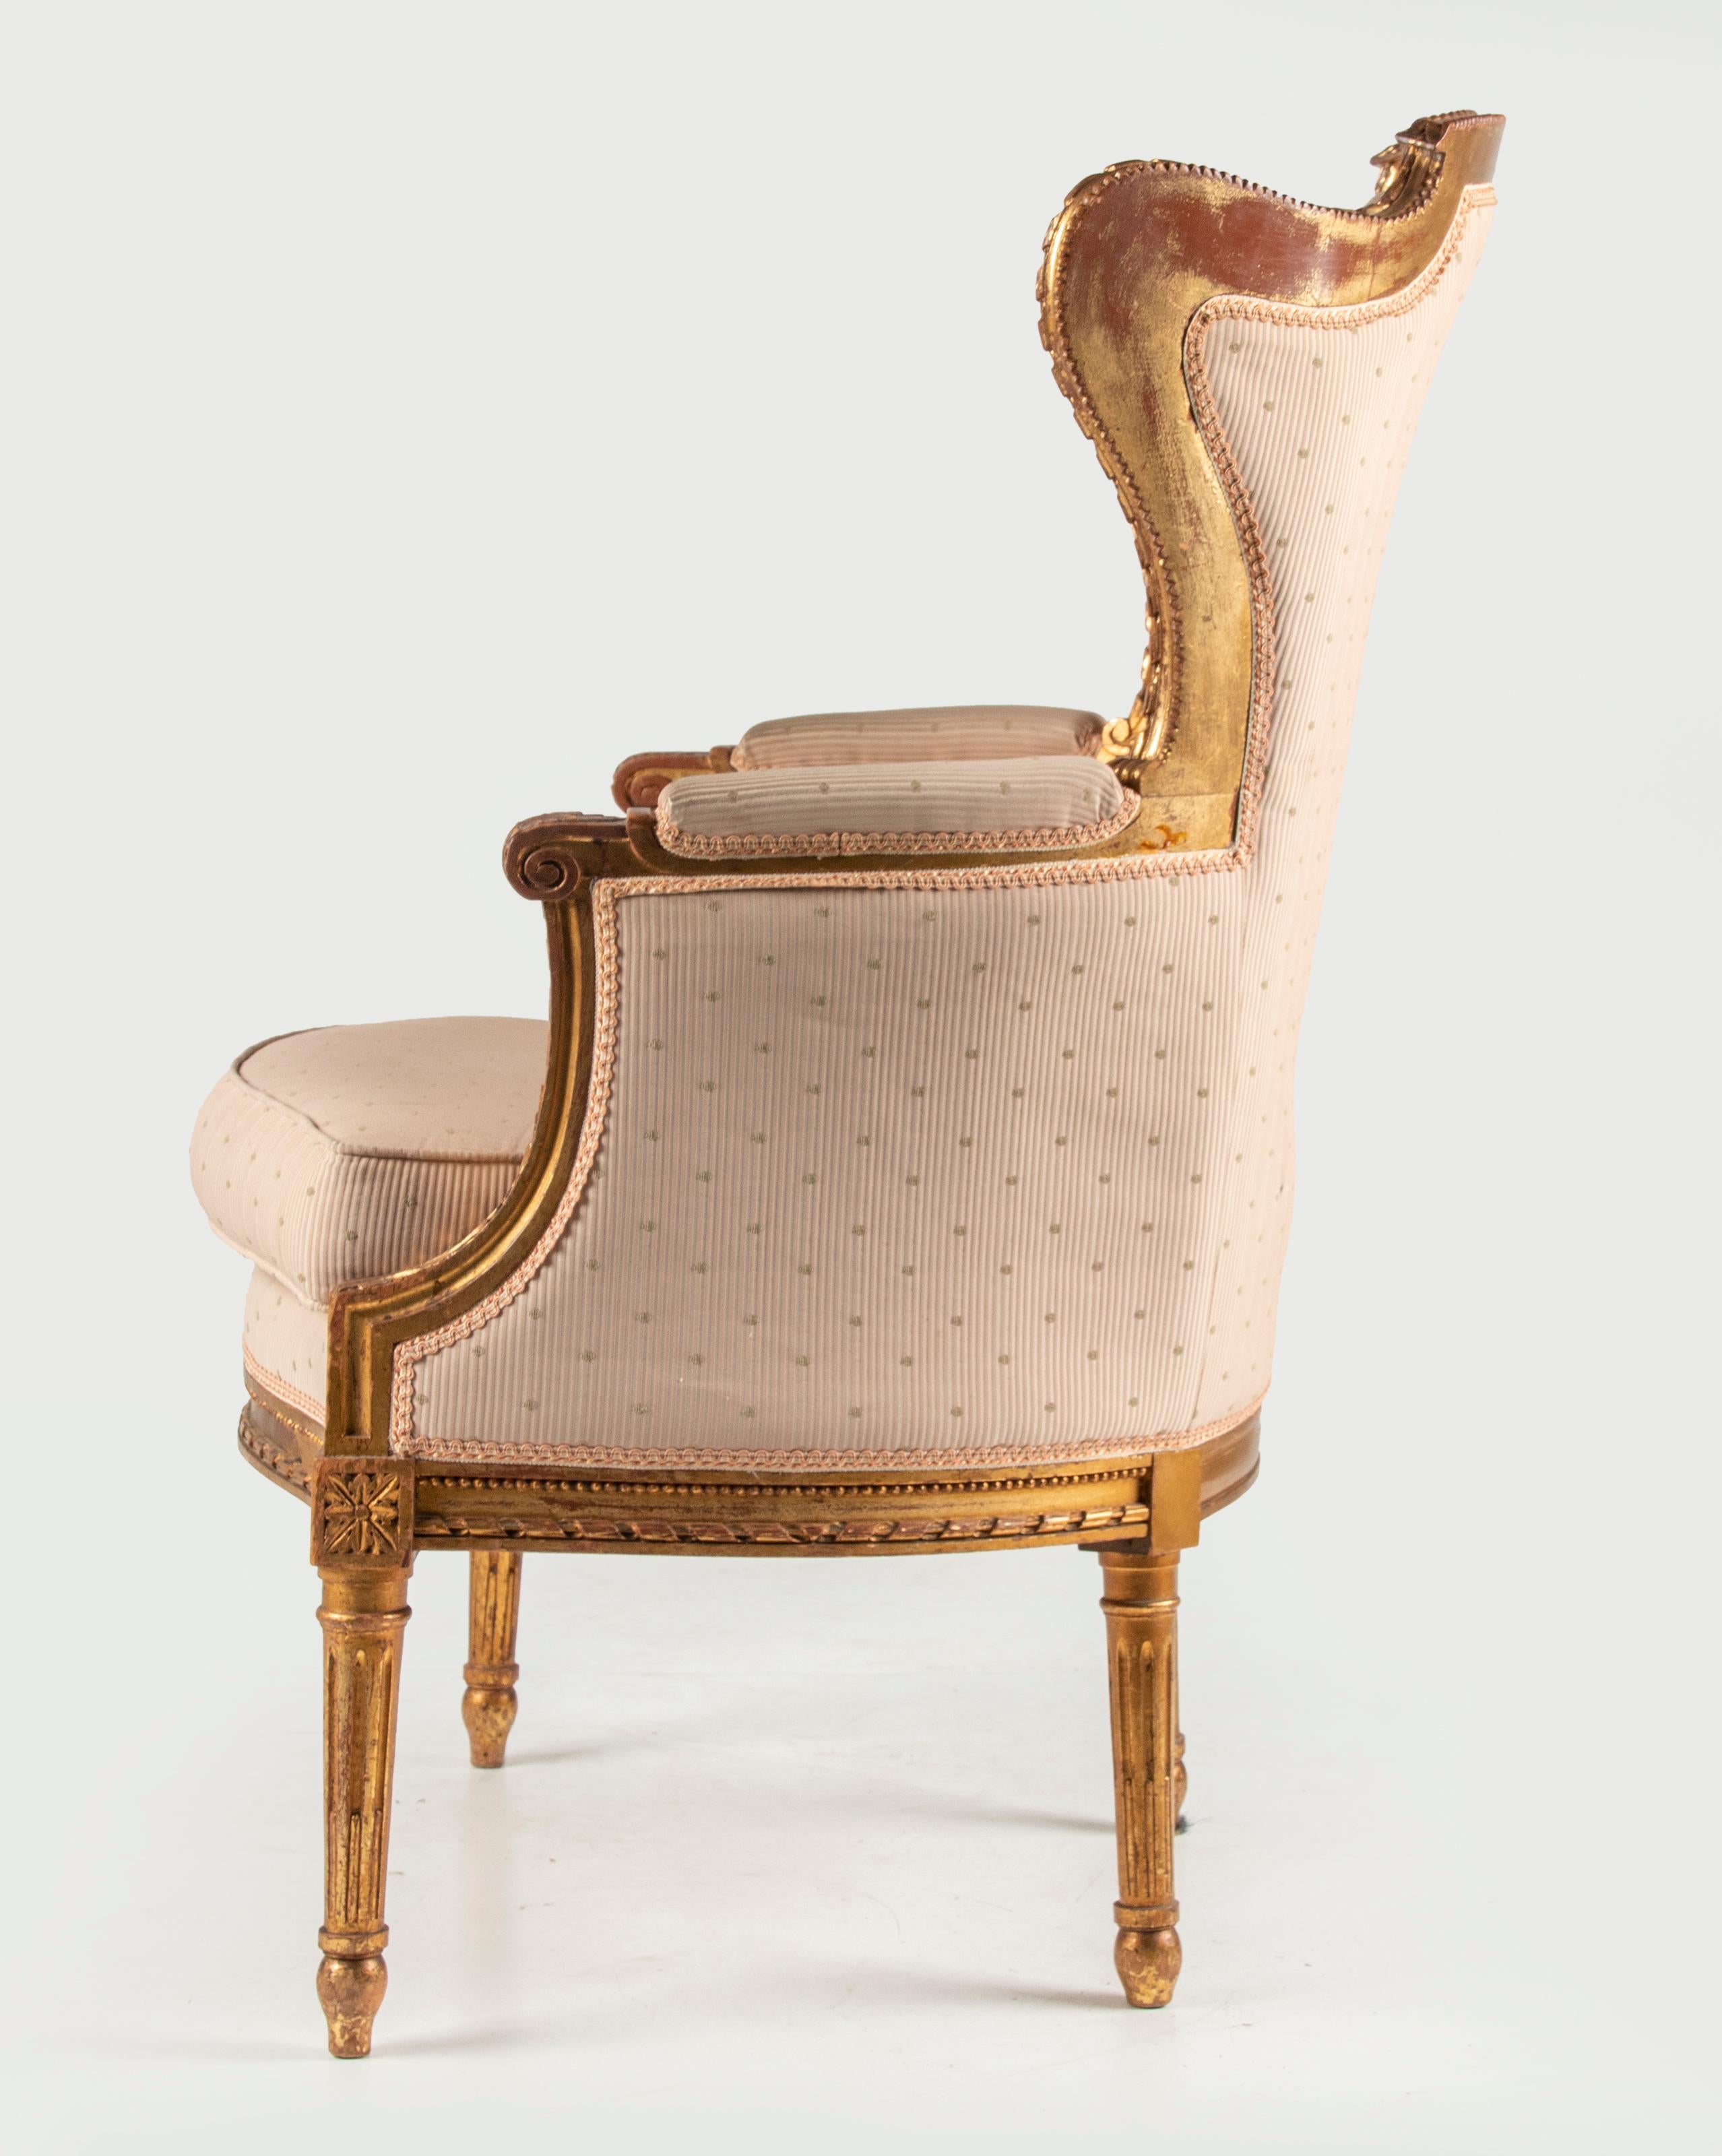 Late 19th Century Louis XVI Style Gilt-Wood Bergère Armchair In Good Condition For Sale In Casteren, Noord-Brabant